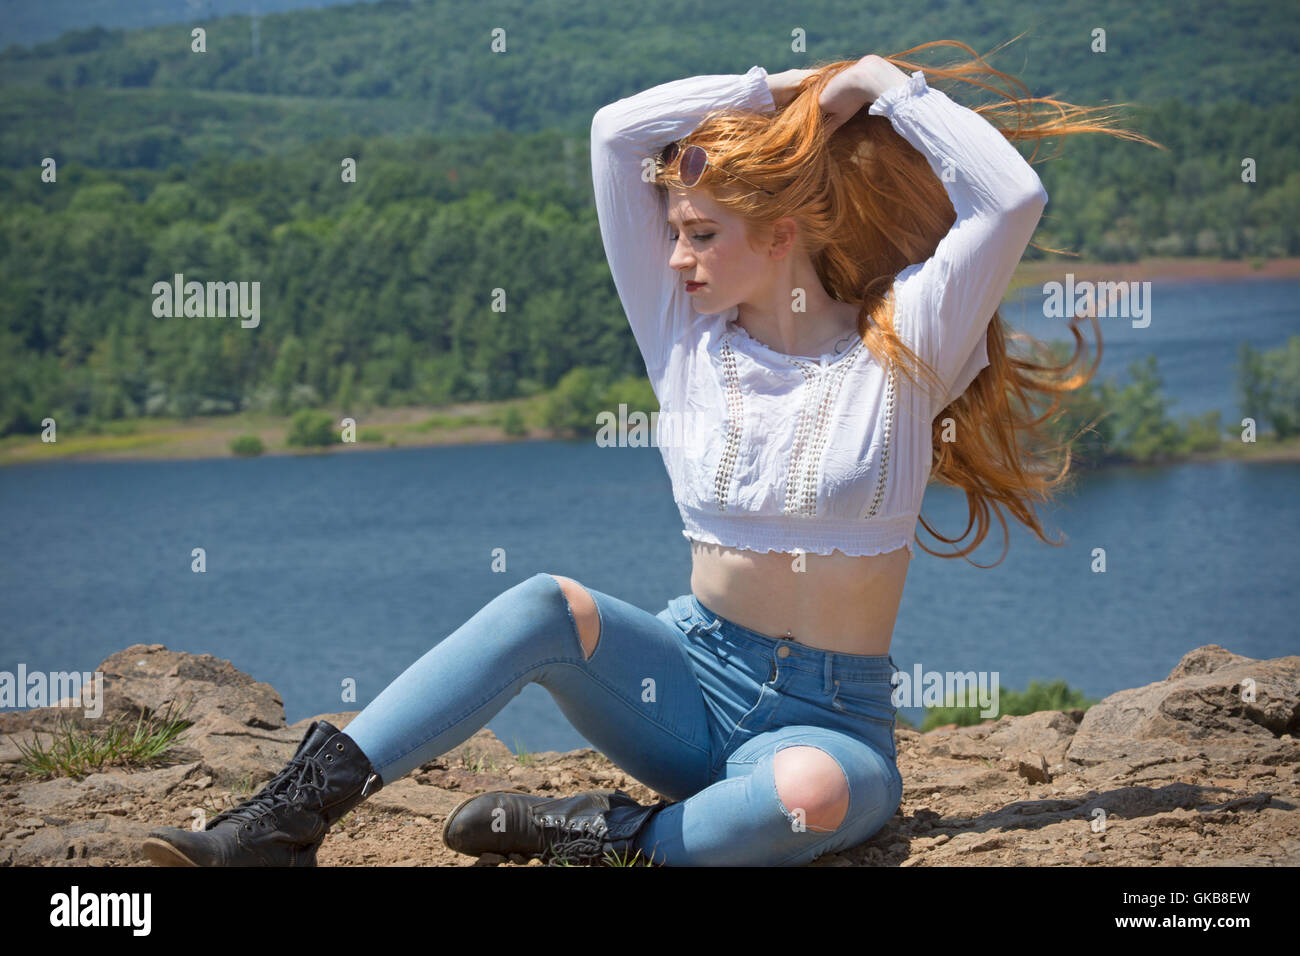 Beautiful red head in skinny jeans, black boots, and white top, sitting on mountain top with wind in hair and a lake below. Stock Photo